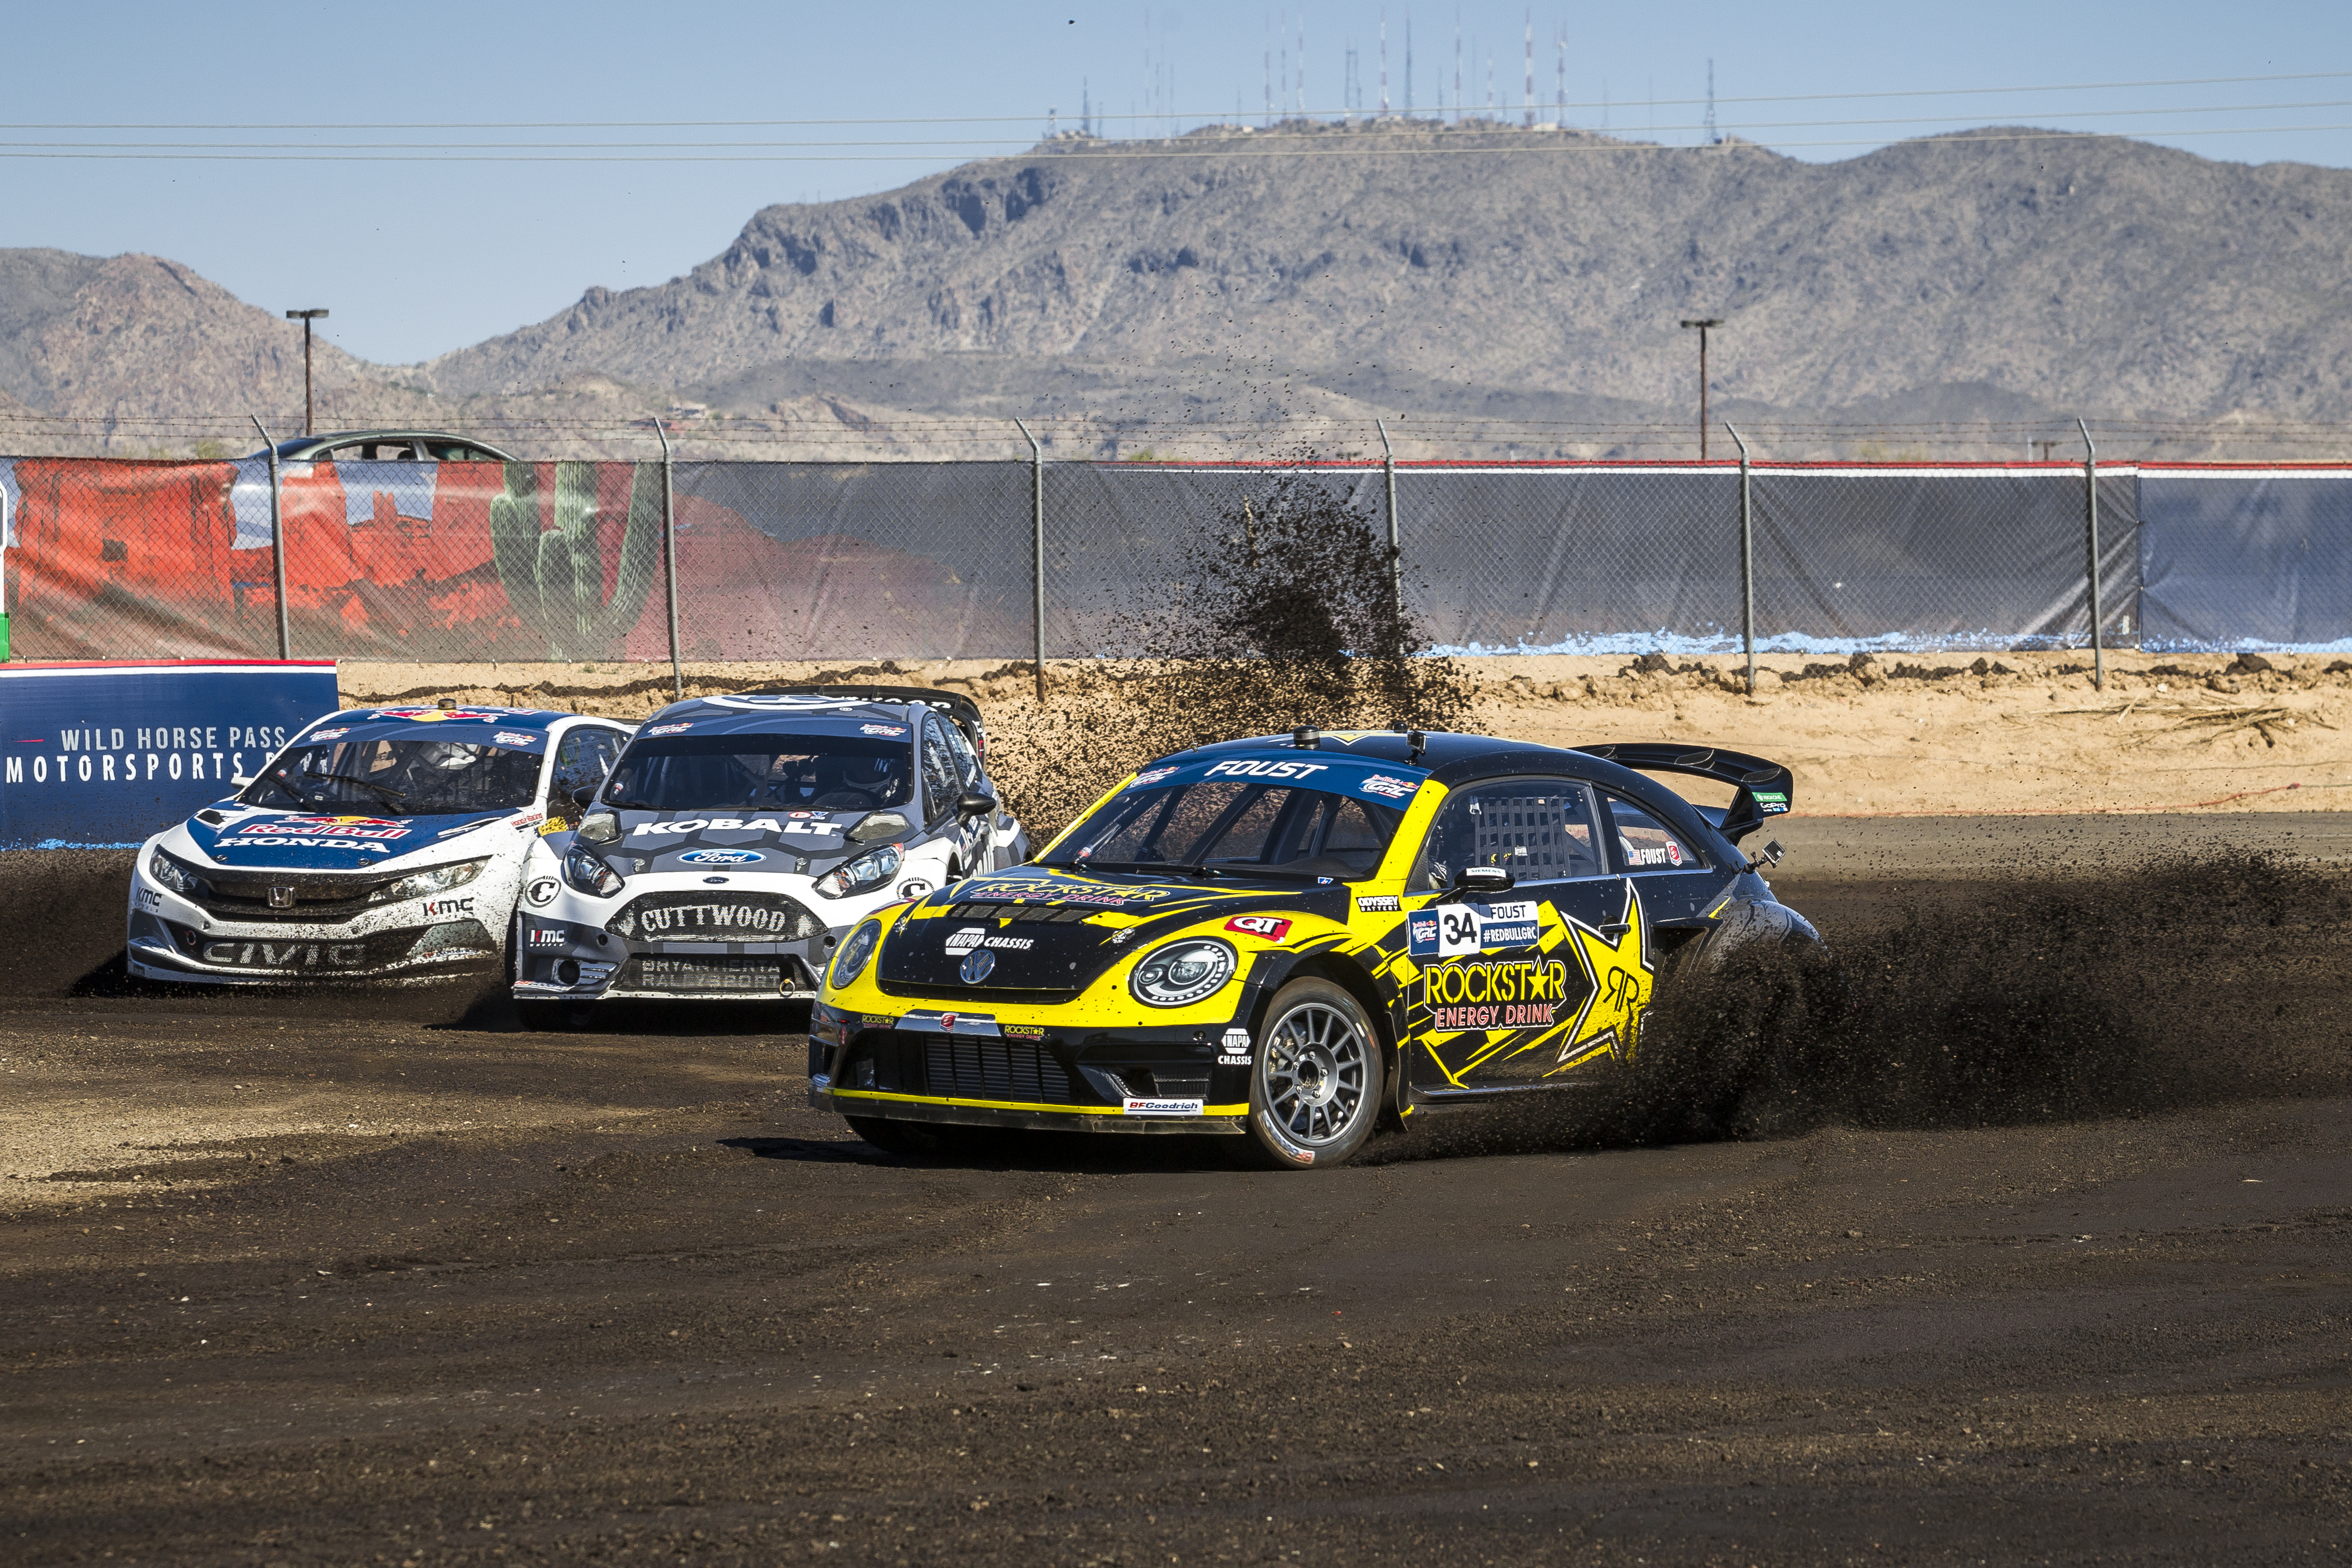 Tanner Faust races at Round 2 of Red Bull Global Rallycross at Wild Horse Pass Motorsports Park in Phoenix, Arizona, USA on March 22, 2016